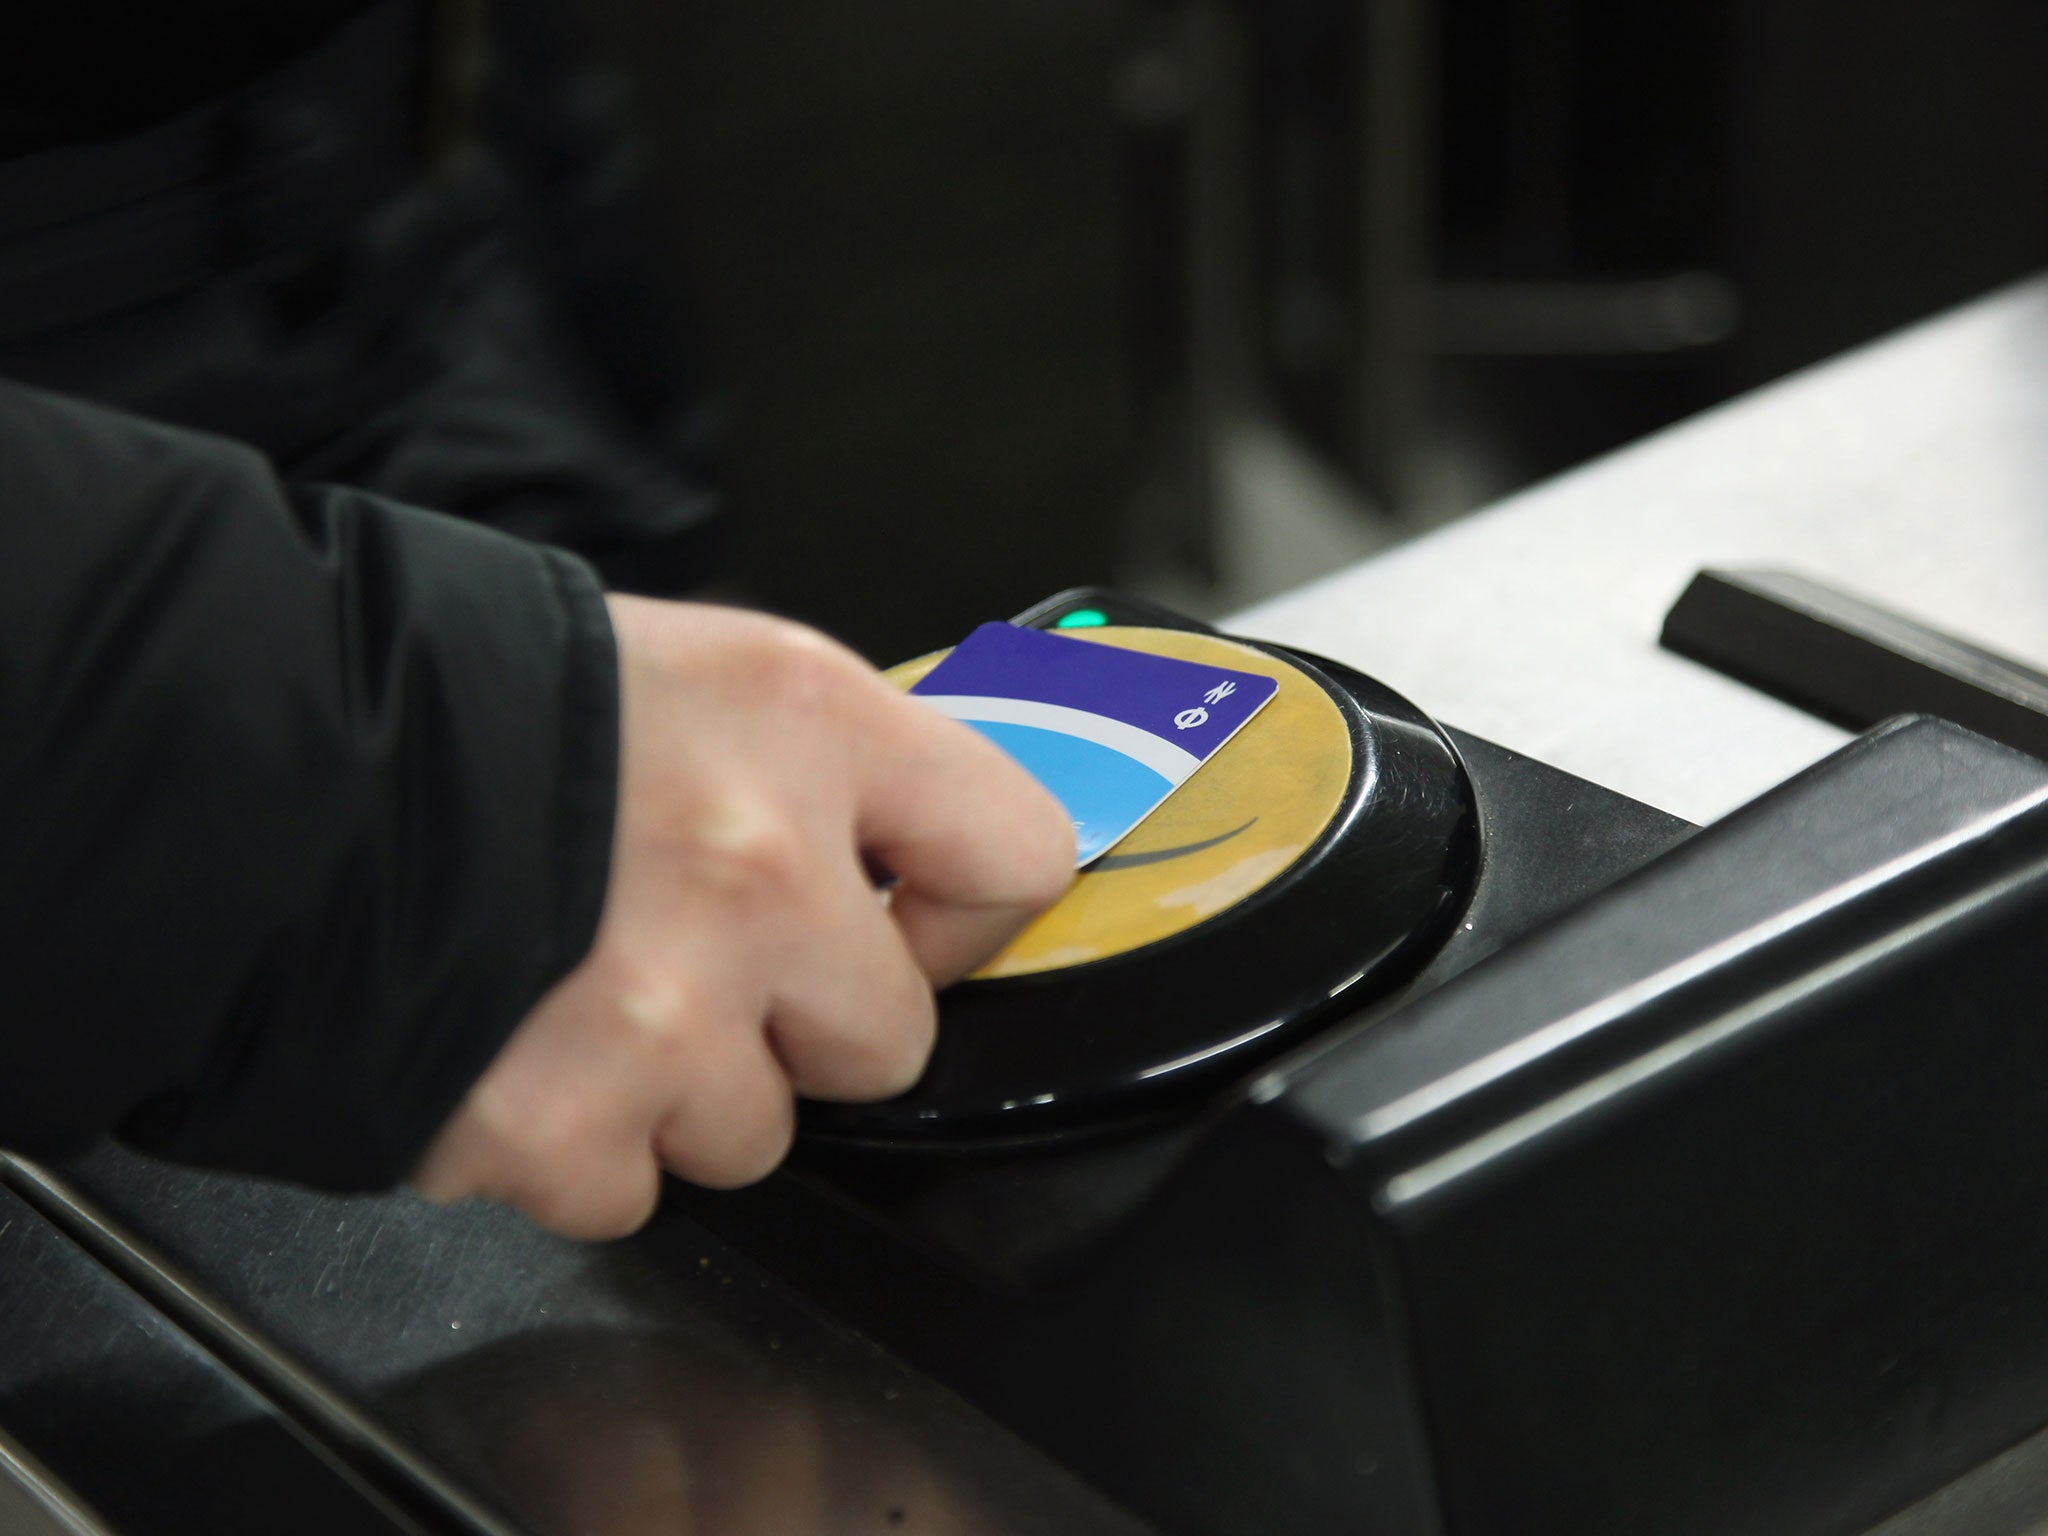 Oyster card readers were not working at many Tube stations and on buses